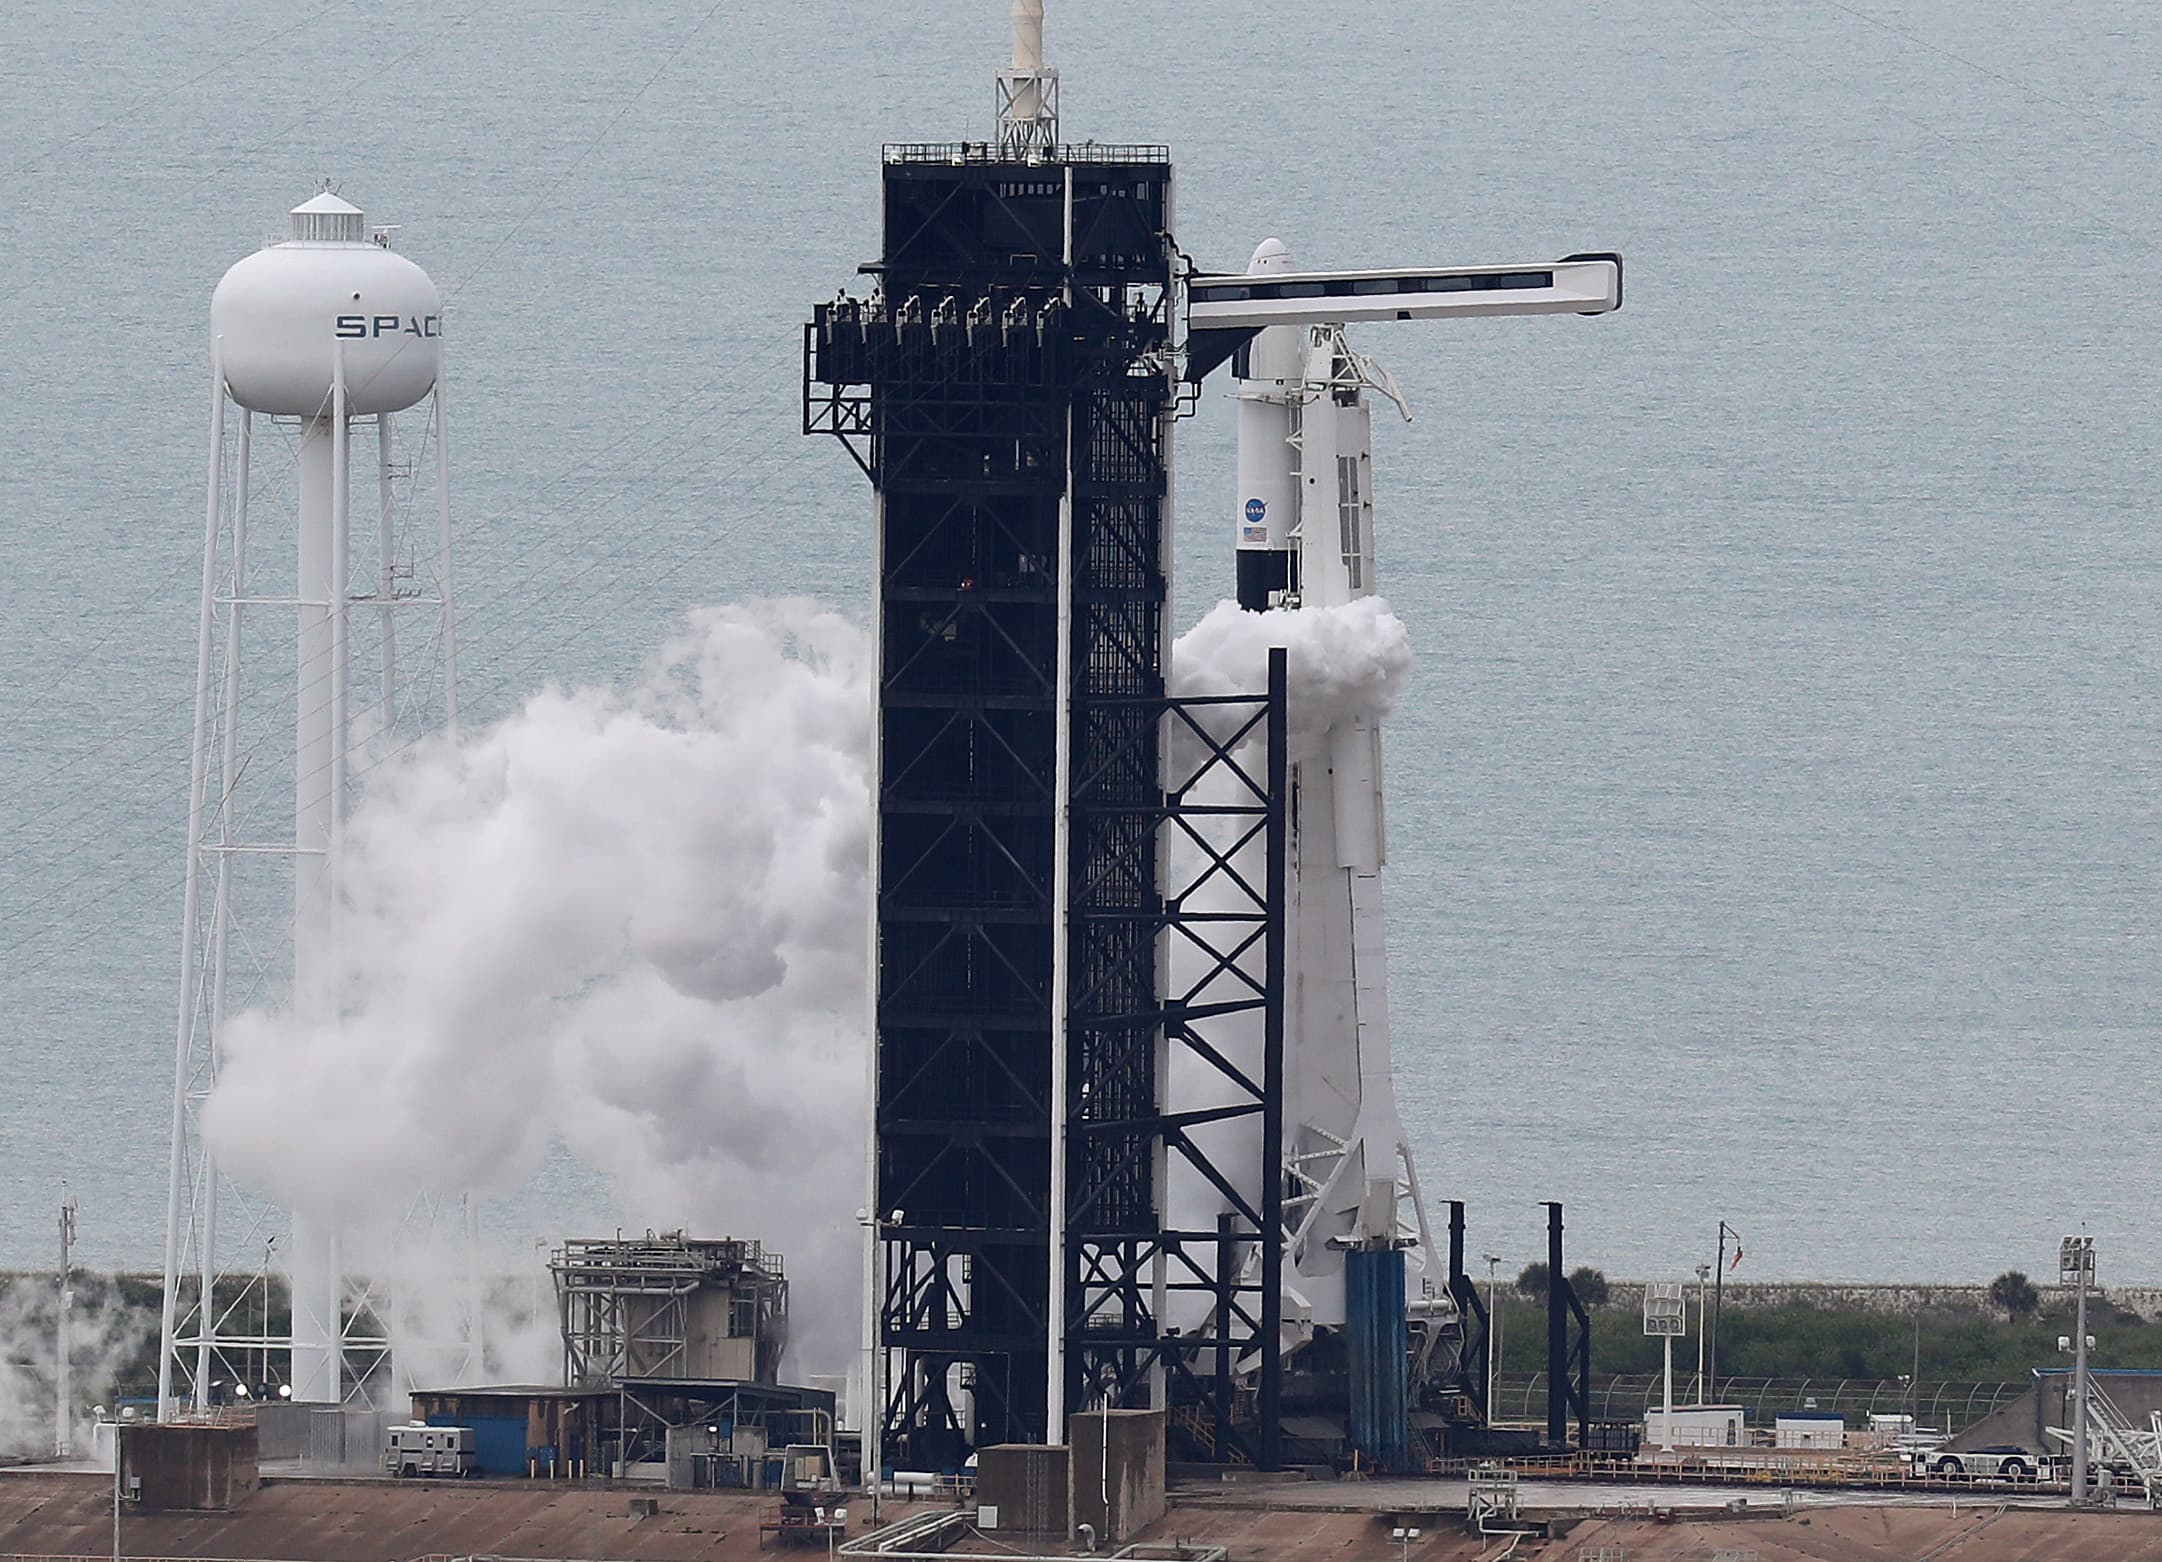 SpaceX and NASA postpone historic astronaut launch due to bad weather - CNBC